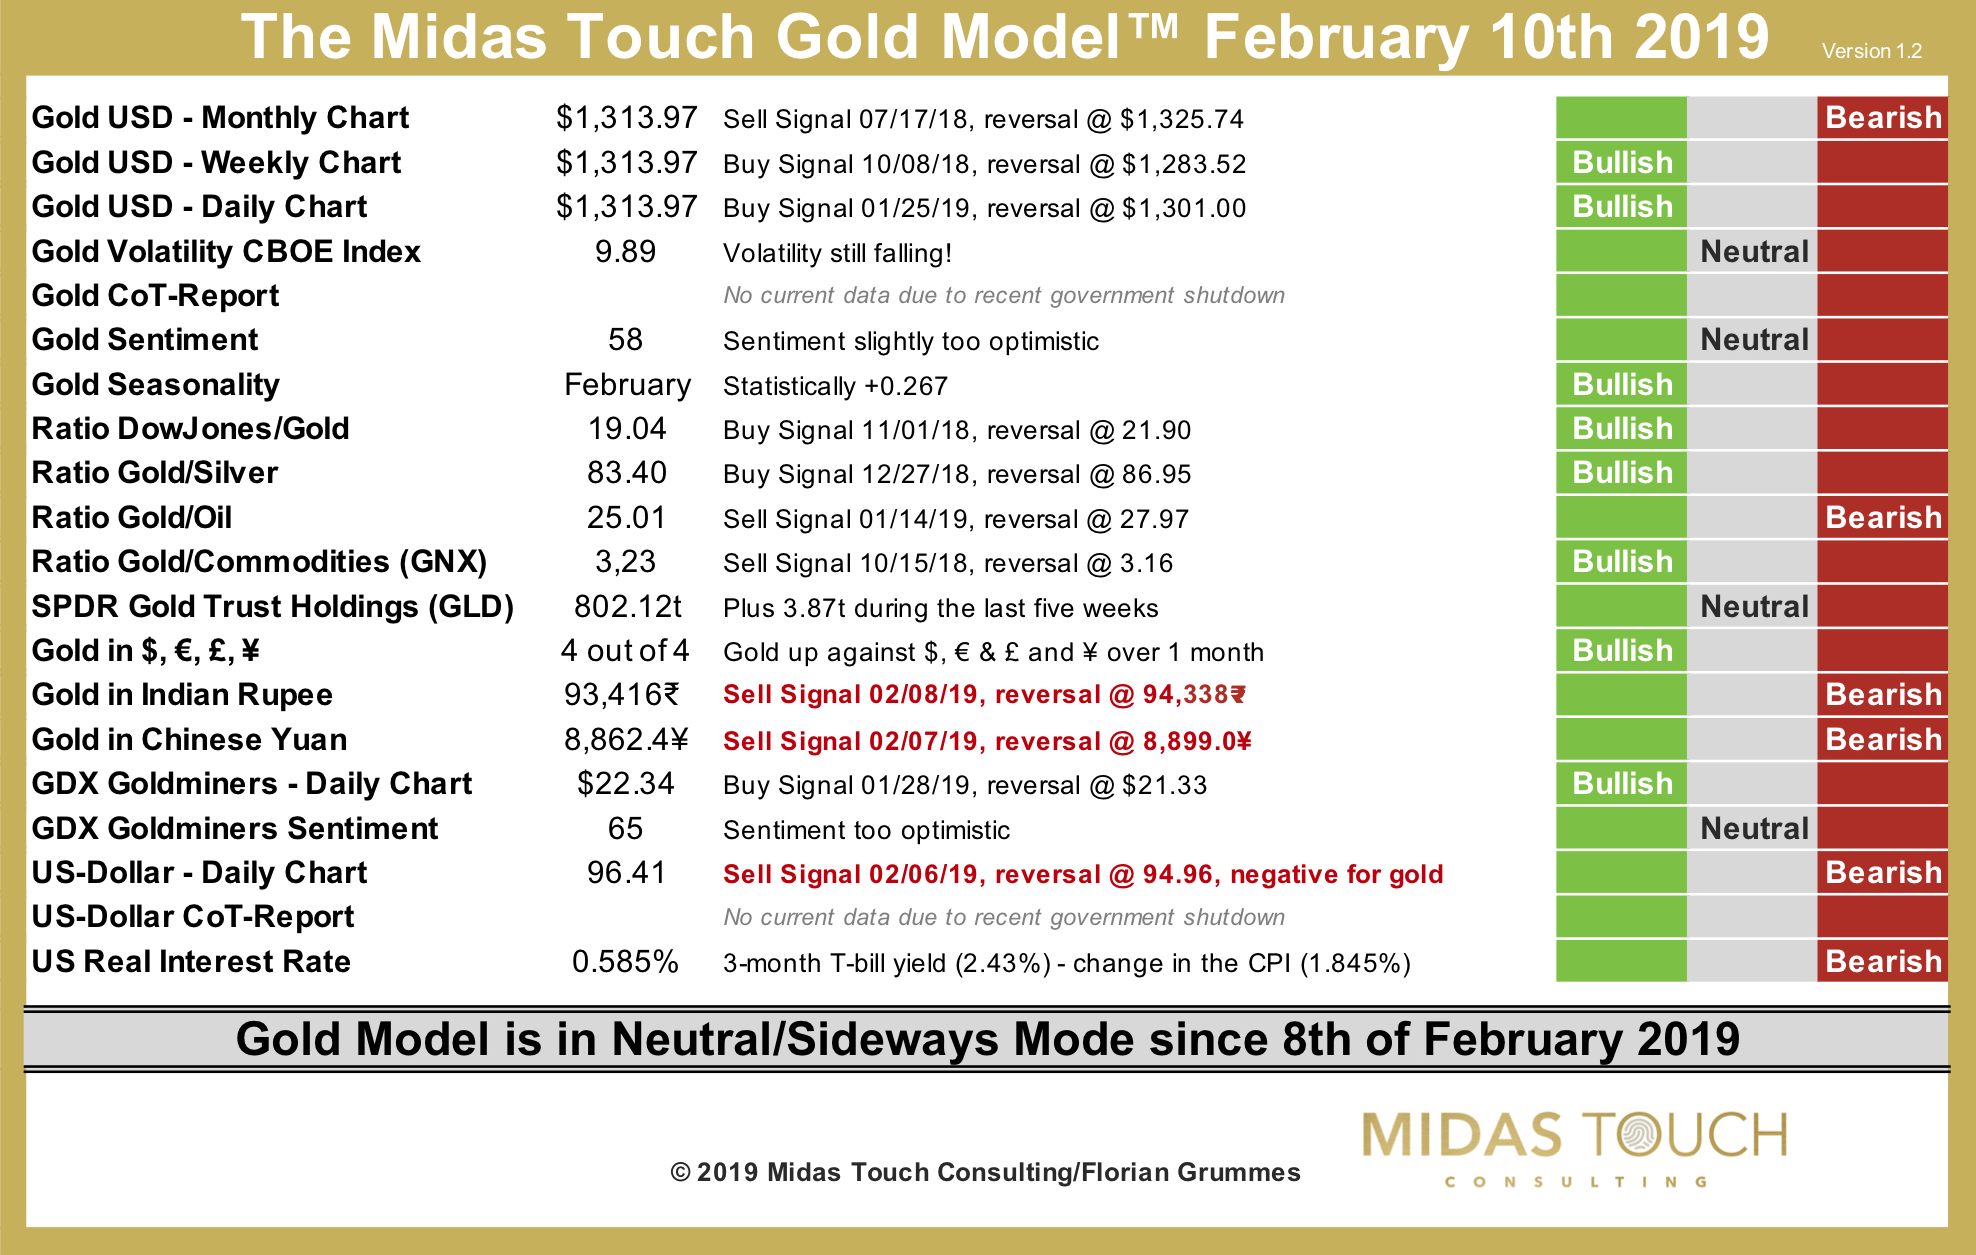 The Midas Touch Gold Model™ as of February 10th, 2019